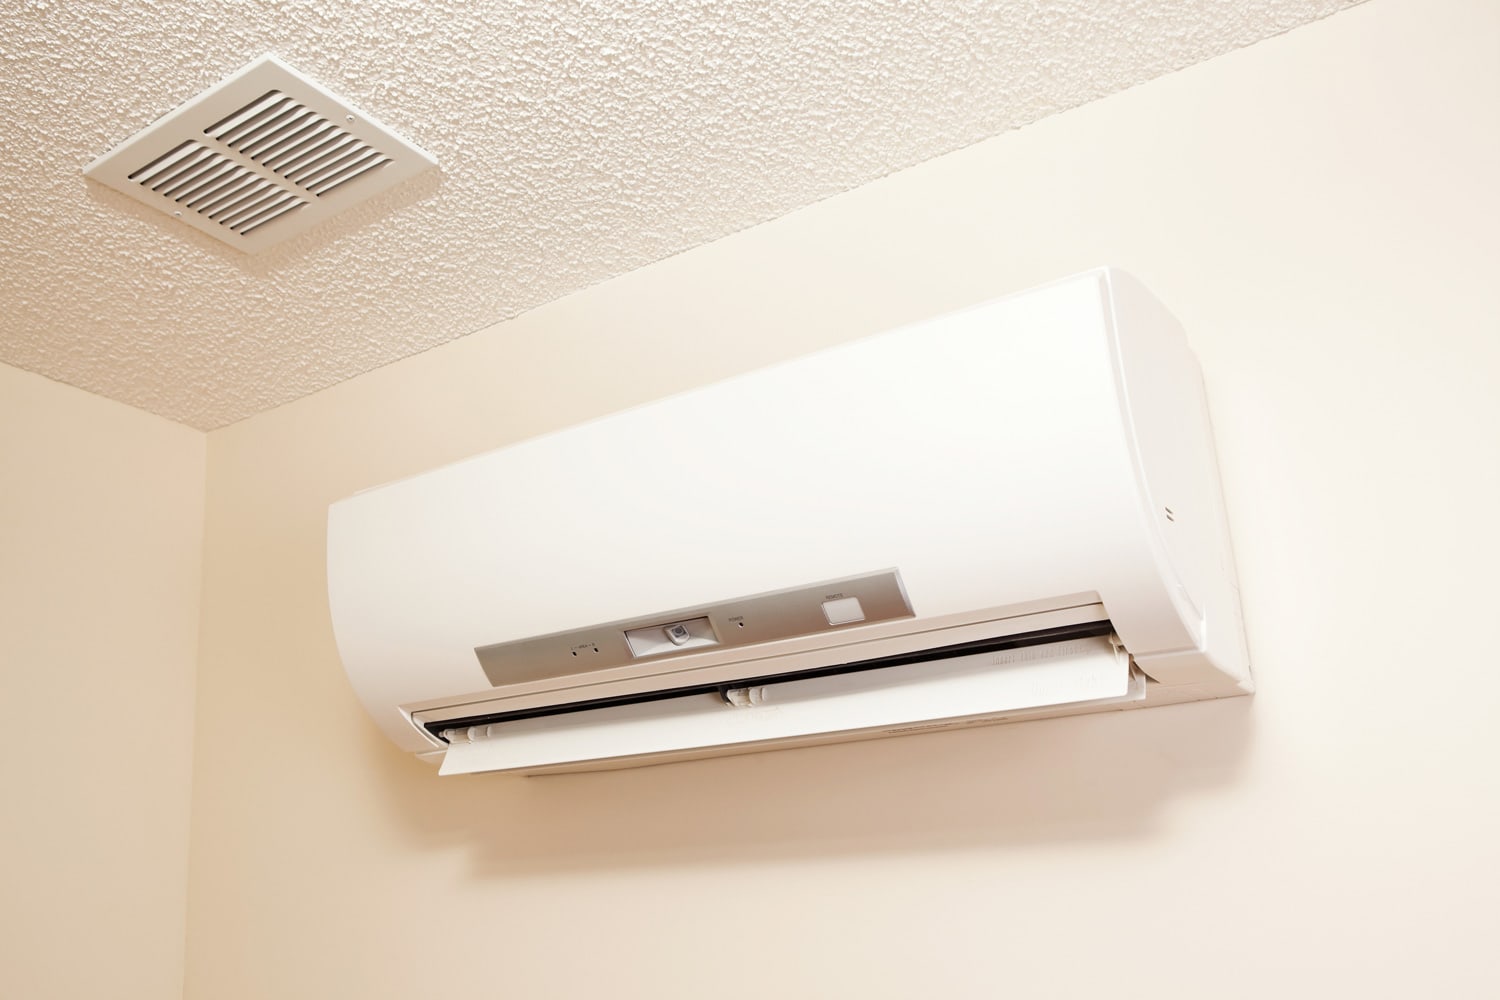 A wall-mount mini-split heating and air conditioning unit installed in a new house